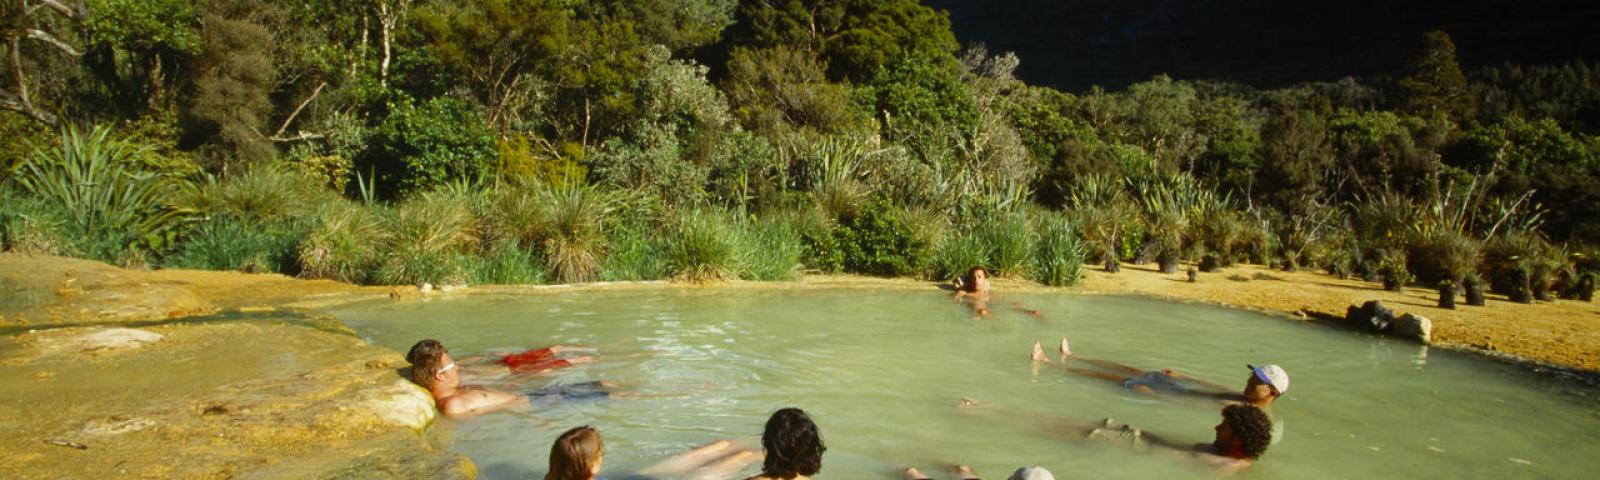 Free Wild Hot Springs When you Self Drive New Zealand